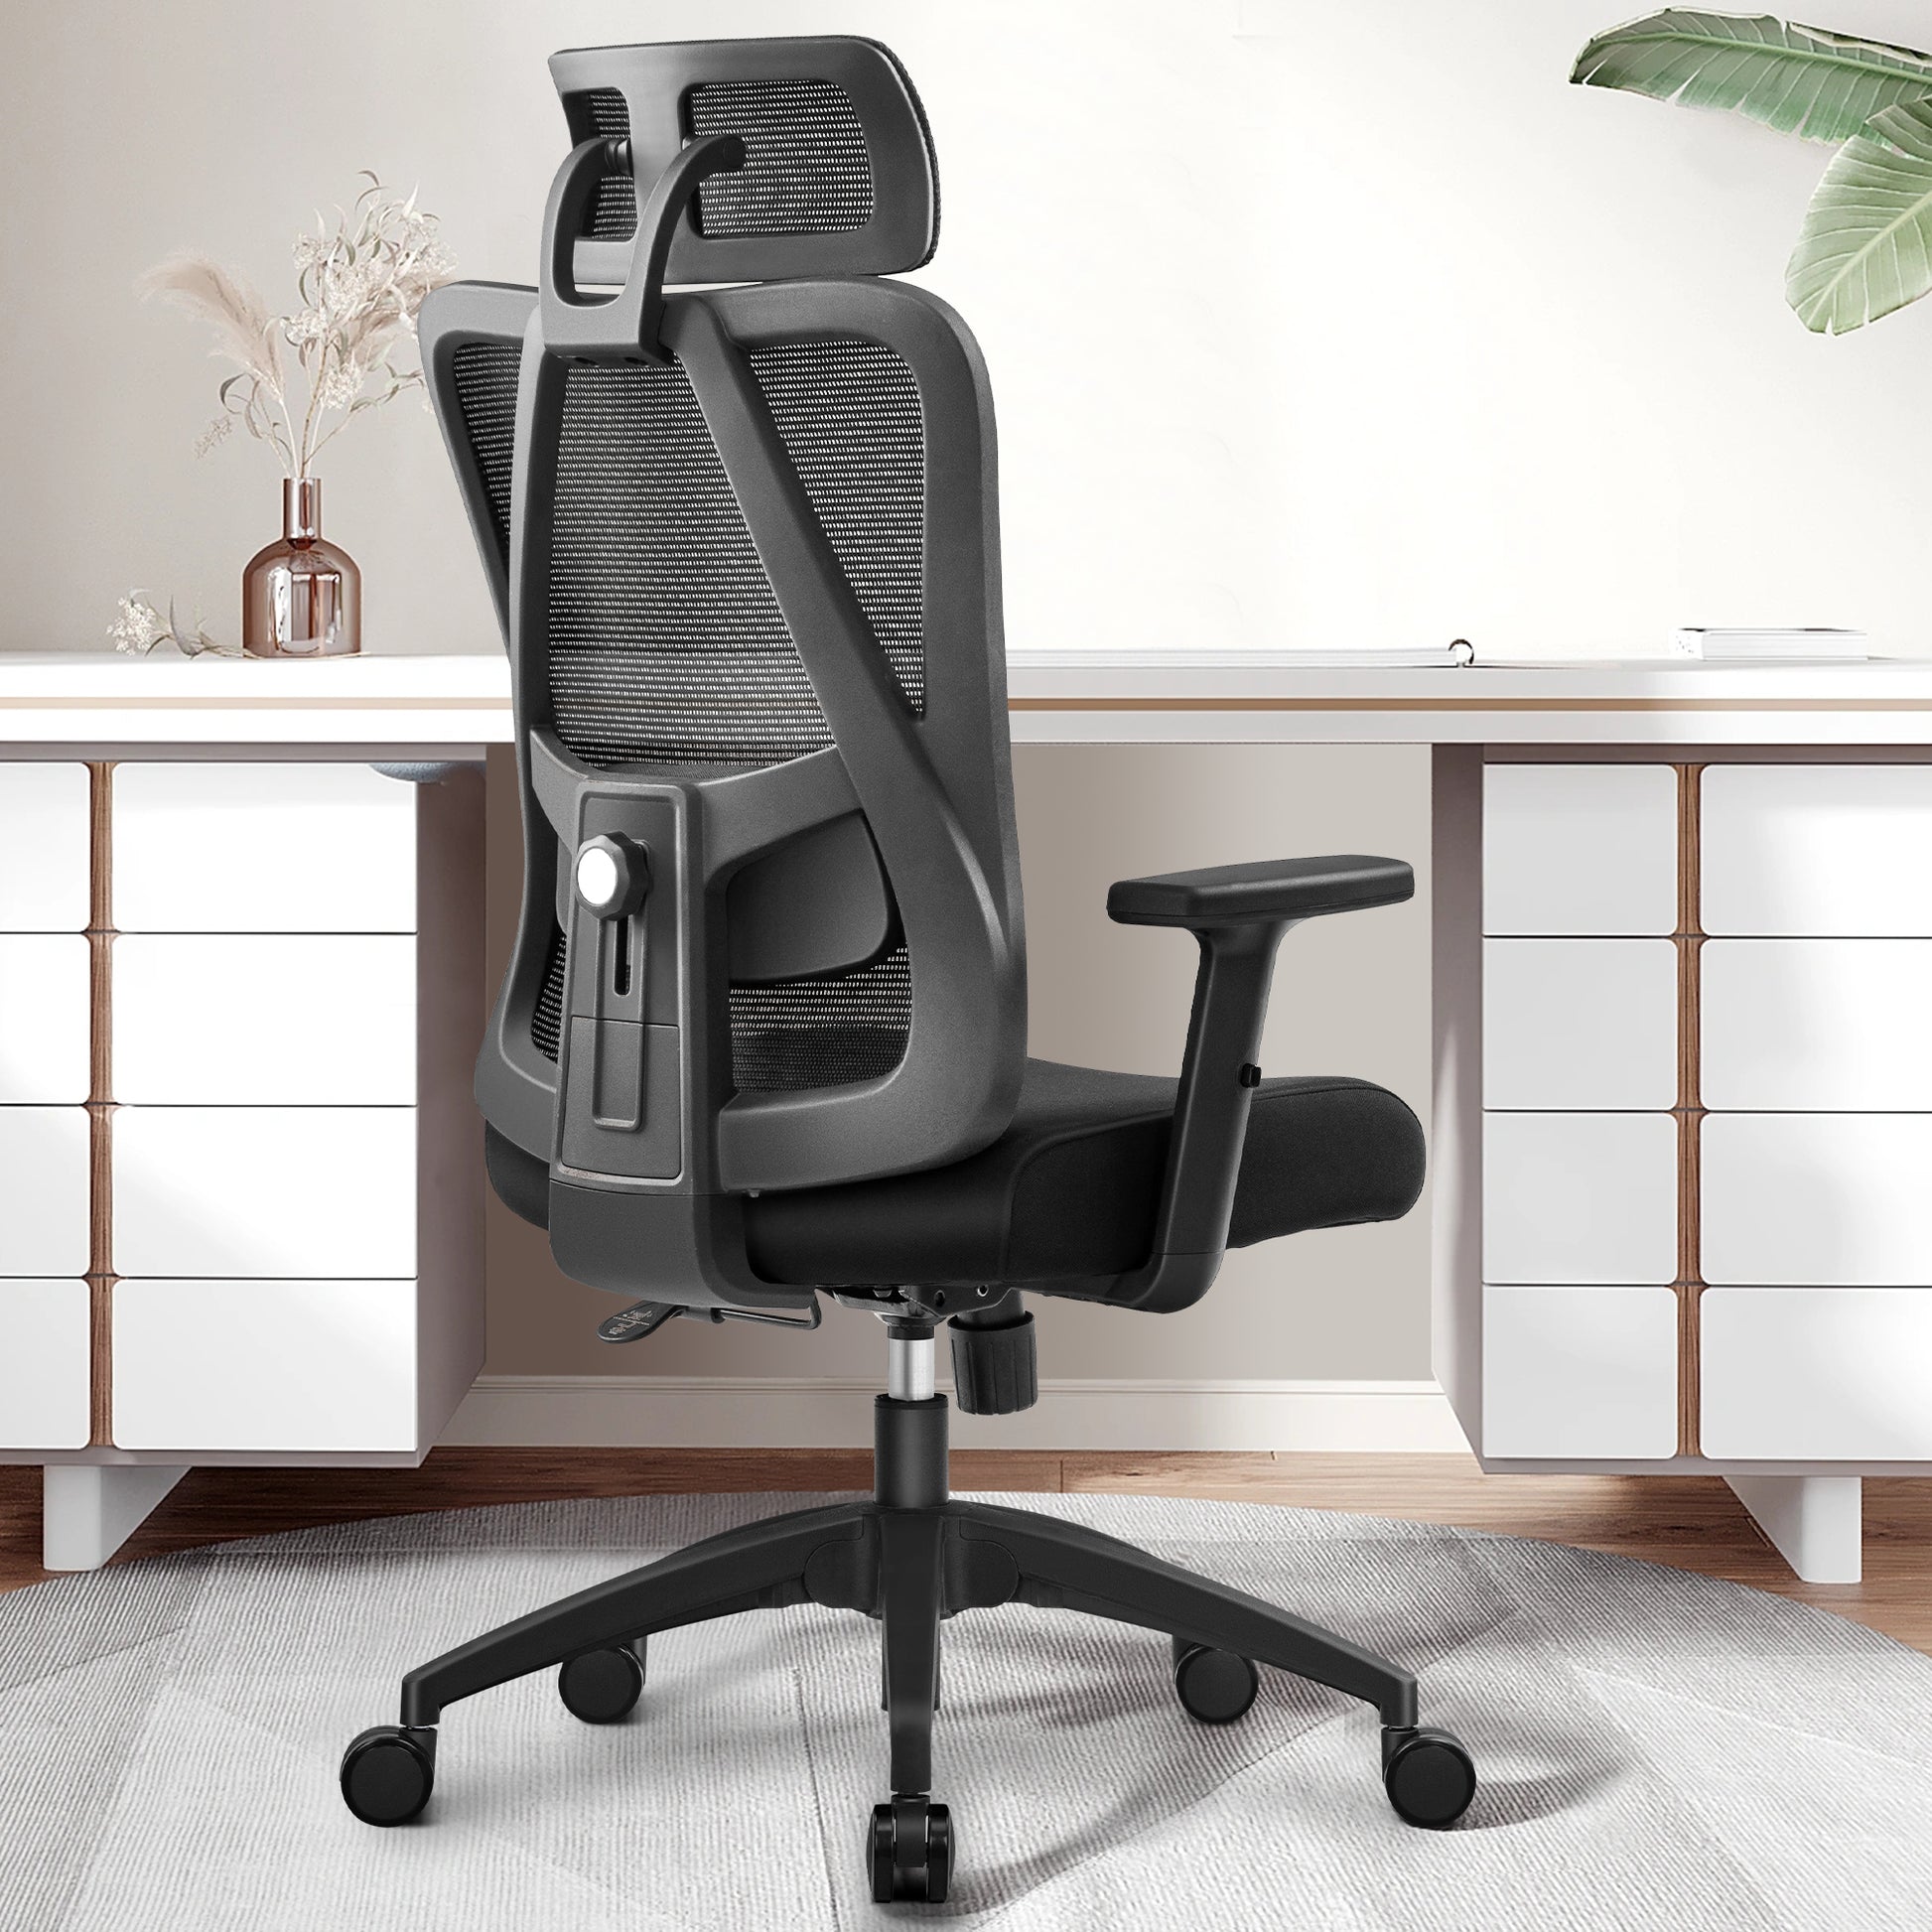 Mesh Office Chair, Ergonomic Chair with Adjustable Lumbar Support